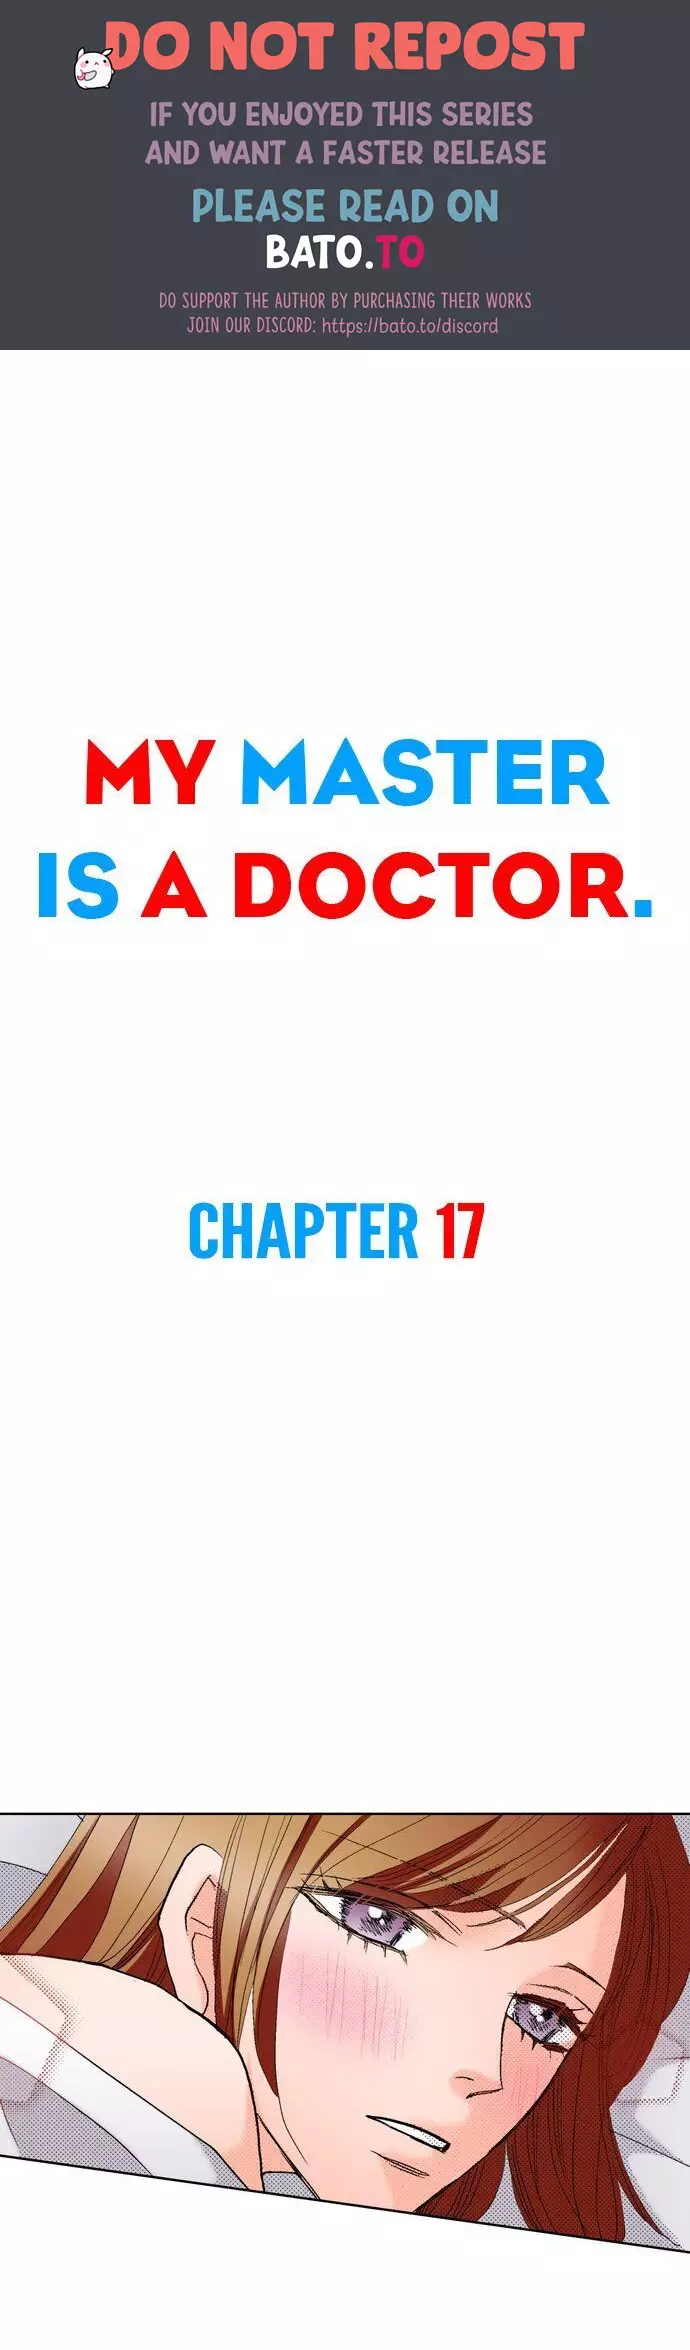 My Master Is A Doctor - 17 page 1-3f7aec9c